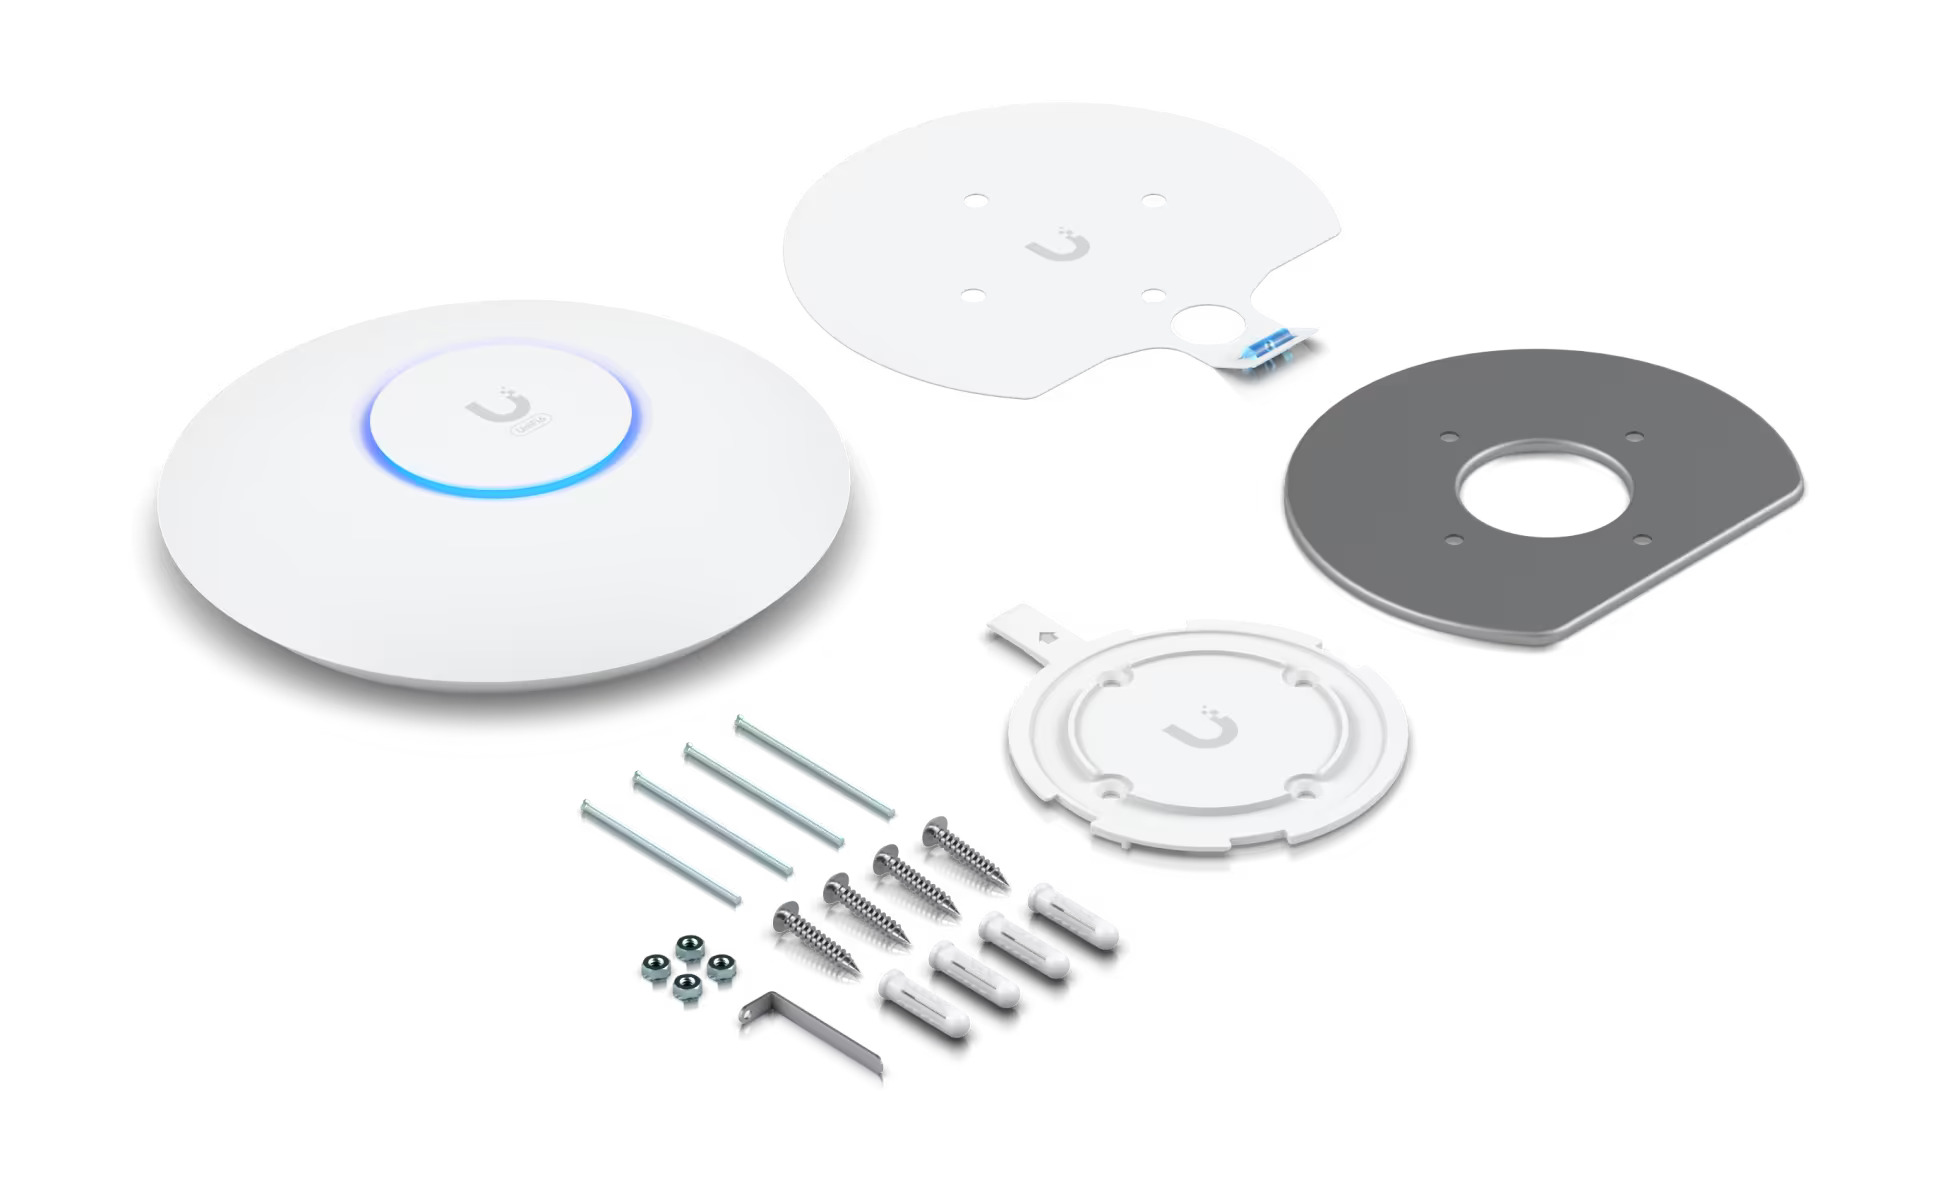 A large marketing image providing additional information about the product Ubiquiti UniFi Wi-Fi 6 Plus Access Point - Additional alt info not provided